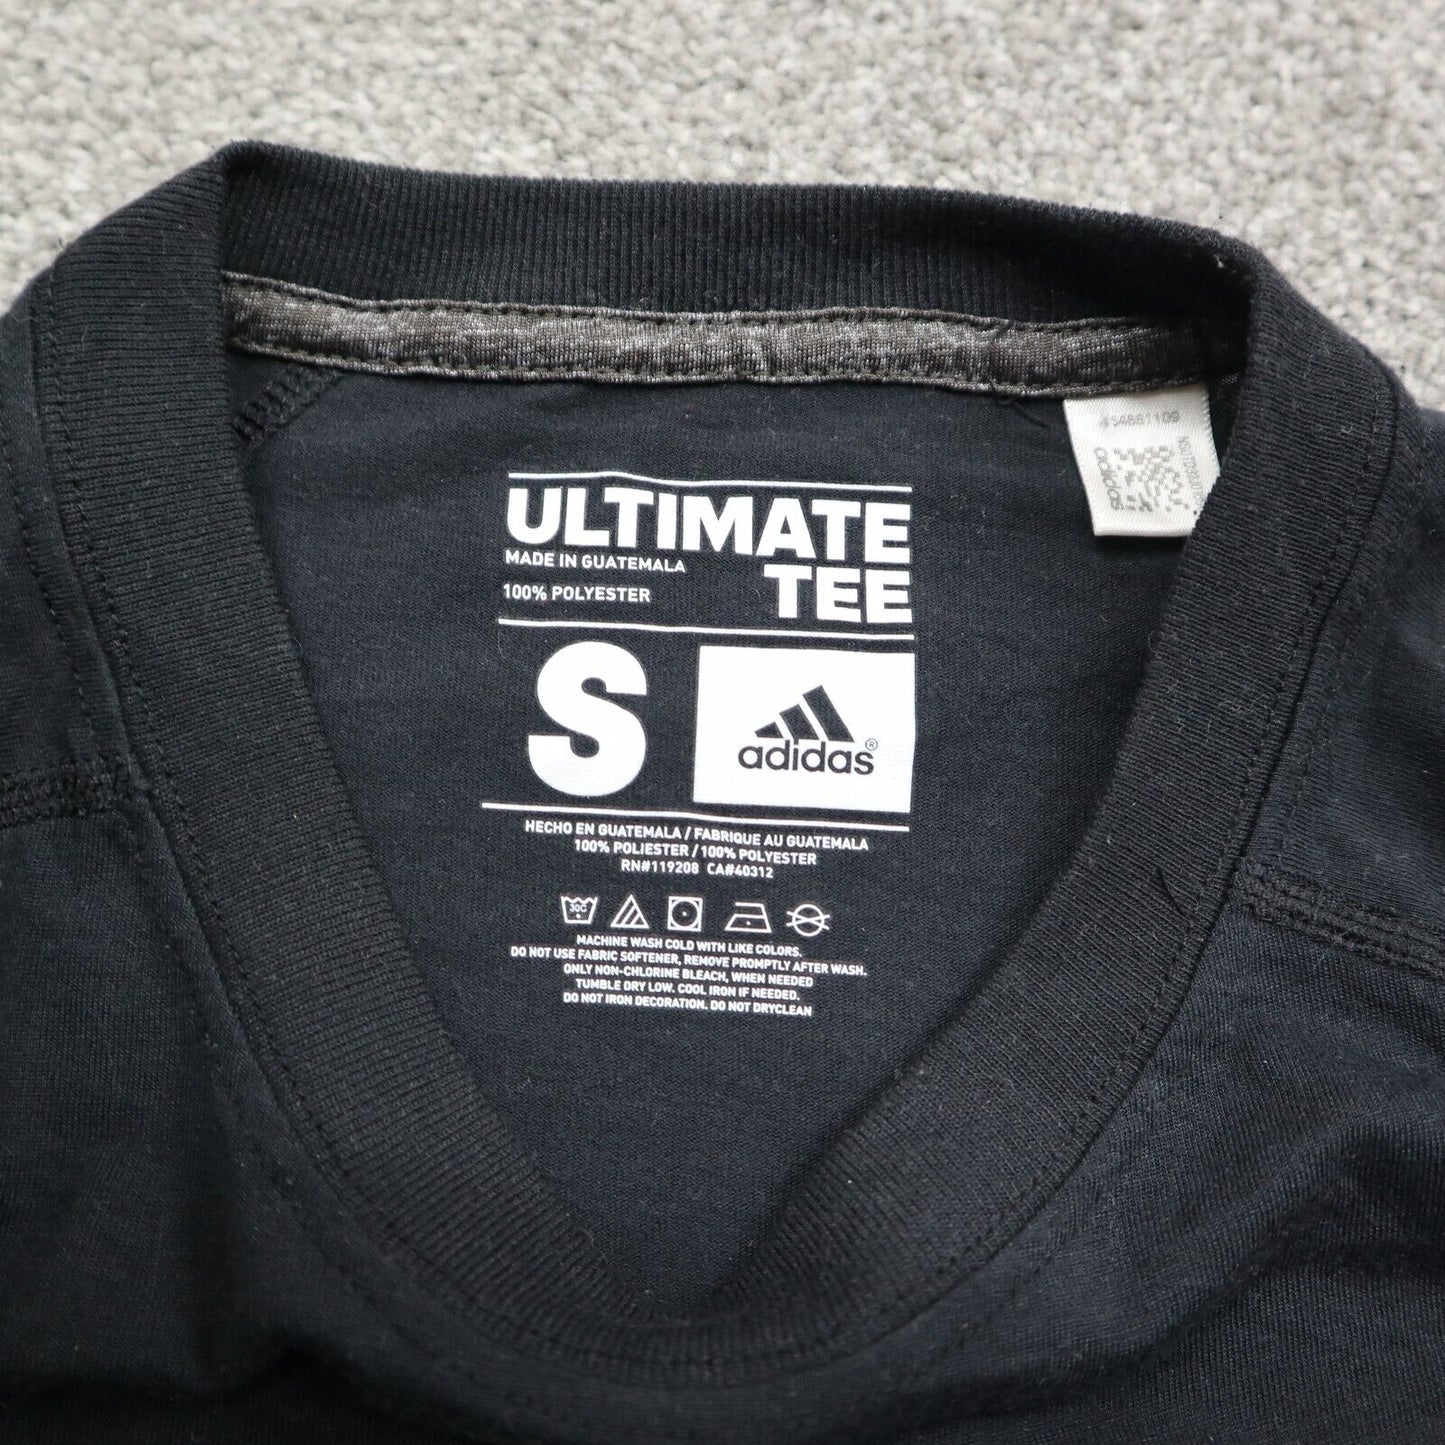 Adidas Mens Pullover Sweatshirt Long Sleeve Graphic Tee Solid Black Size Small